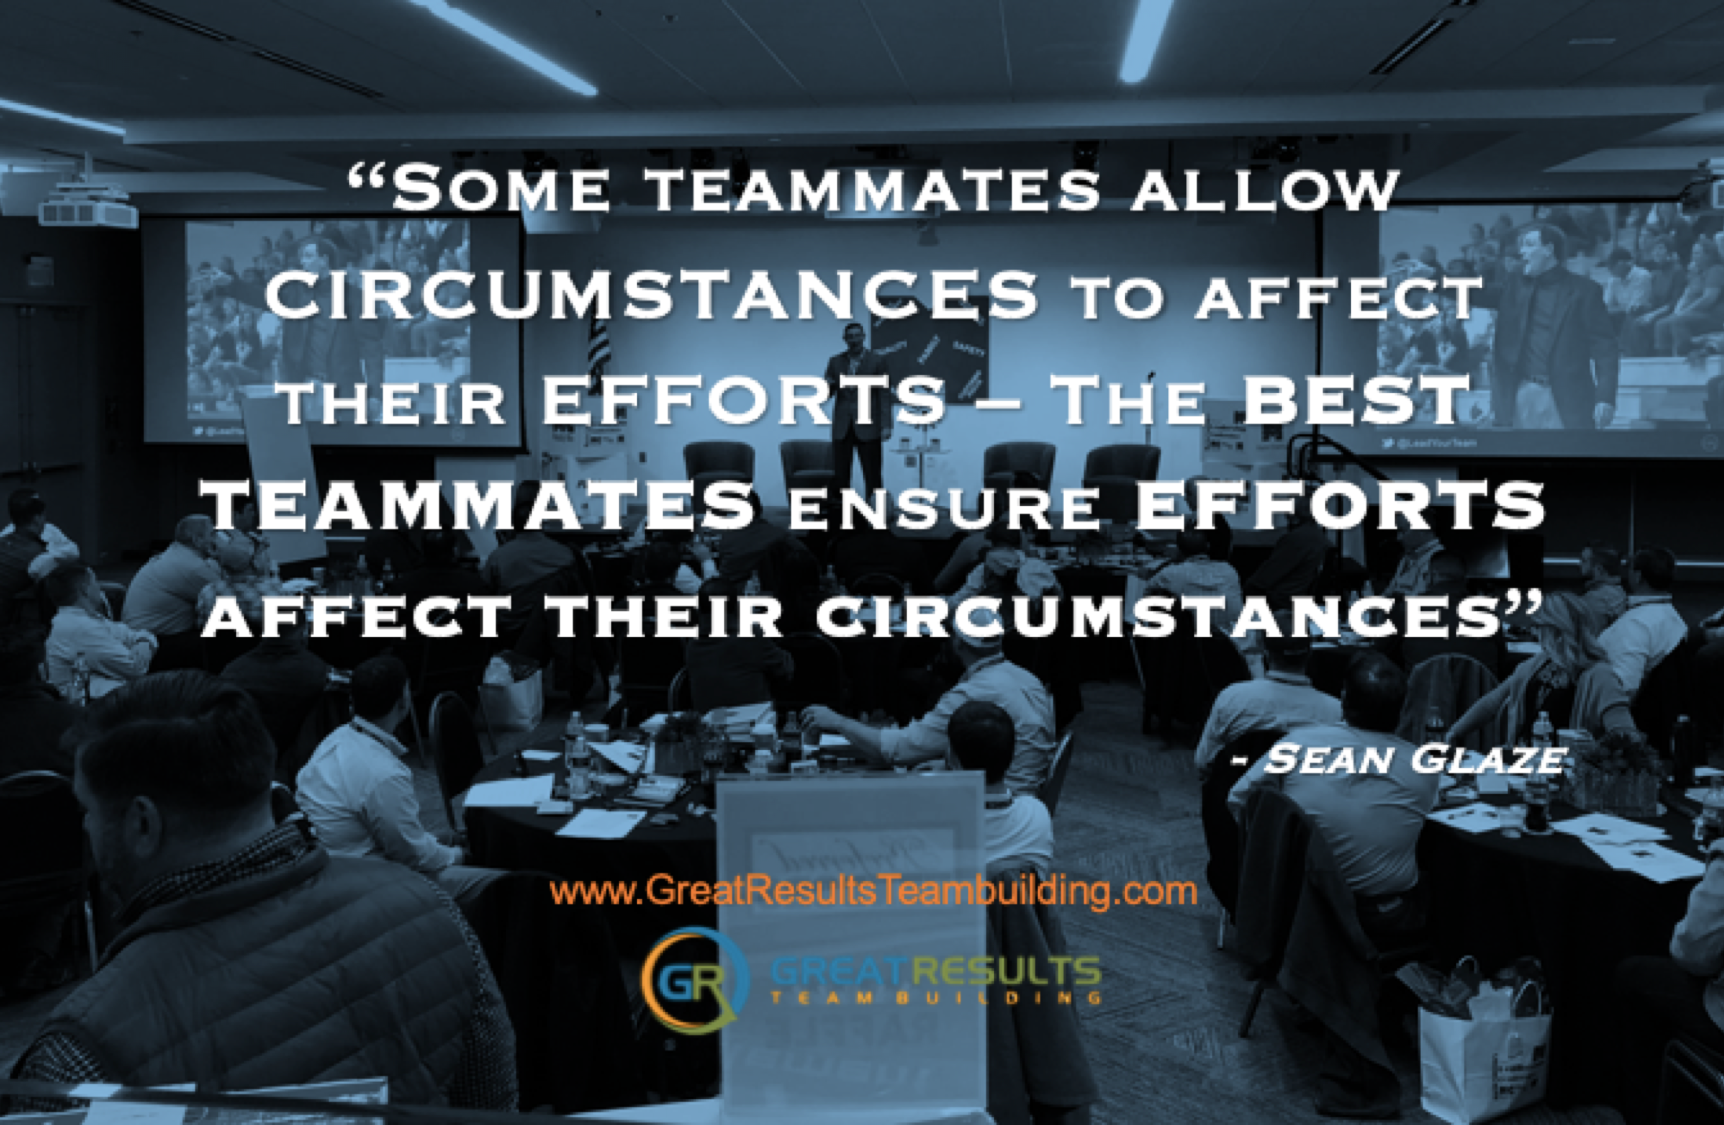 some teammates allow circumstances to affect their efforts the best teammates ensure efforts affect their circumstances. sean glaze